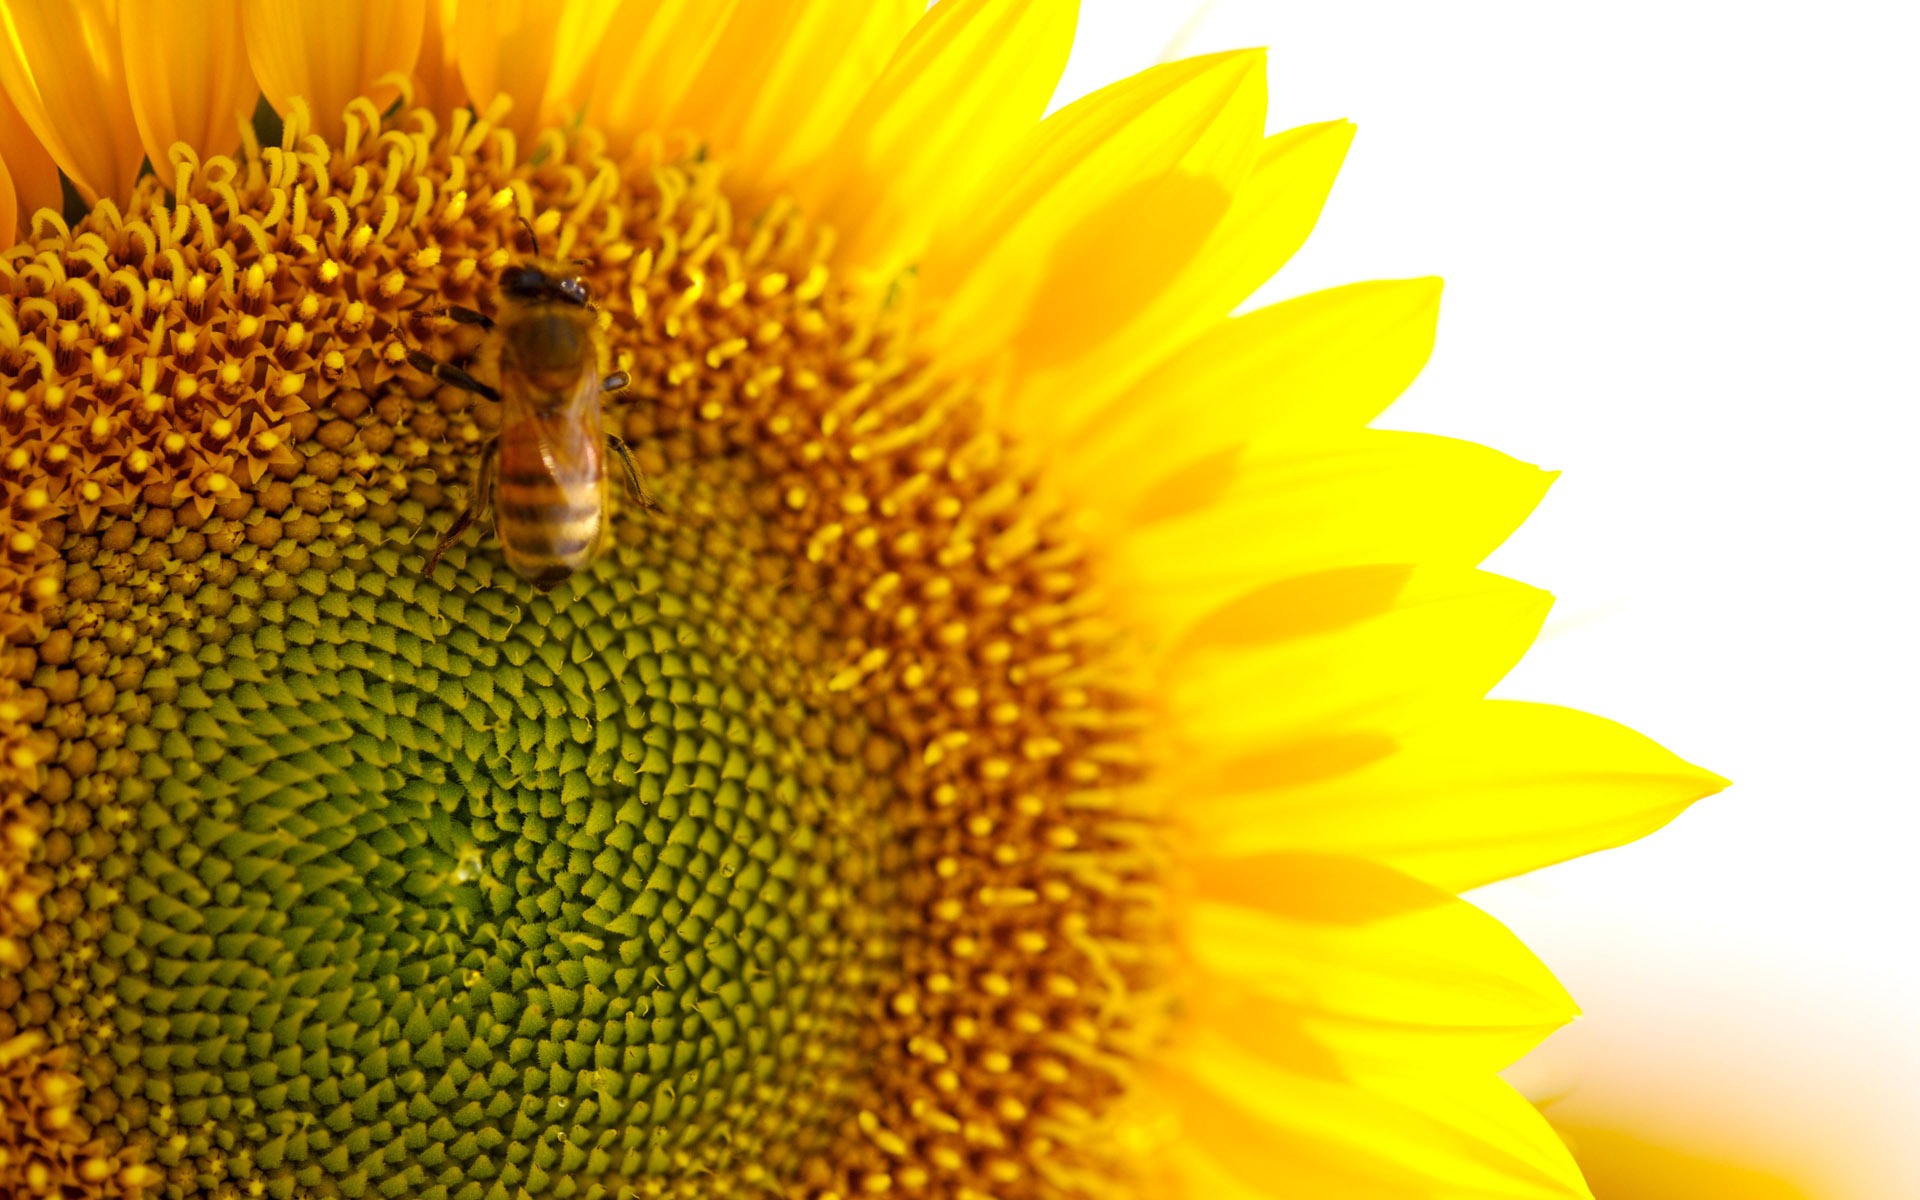 Sunny sunflower photo HD Wallpapers #33 - 1920x1200